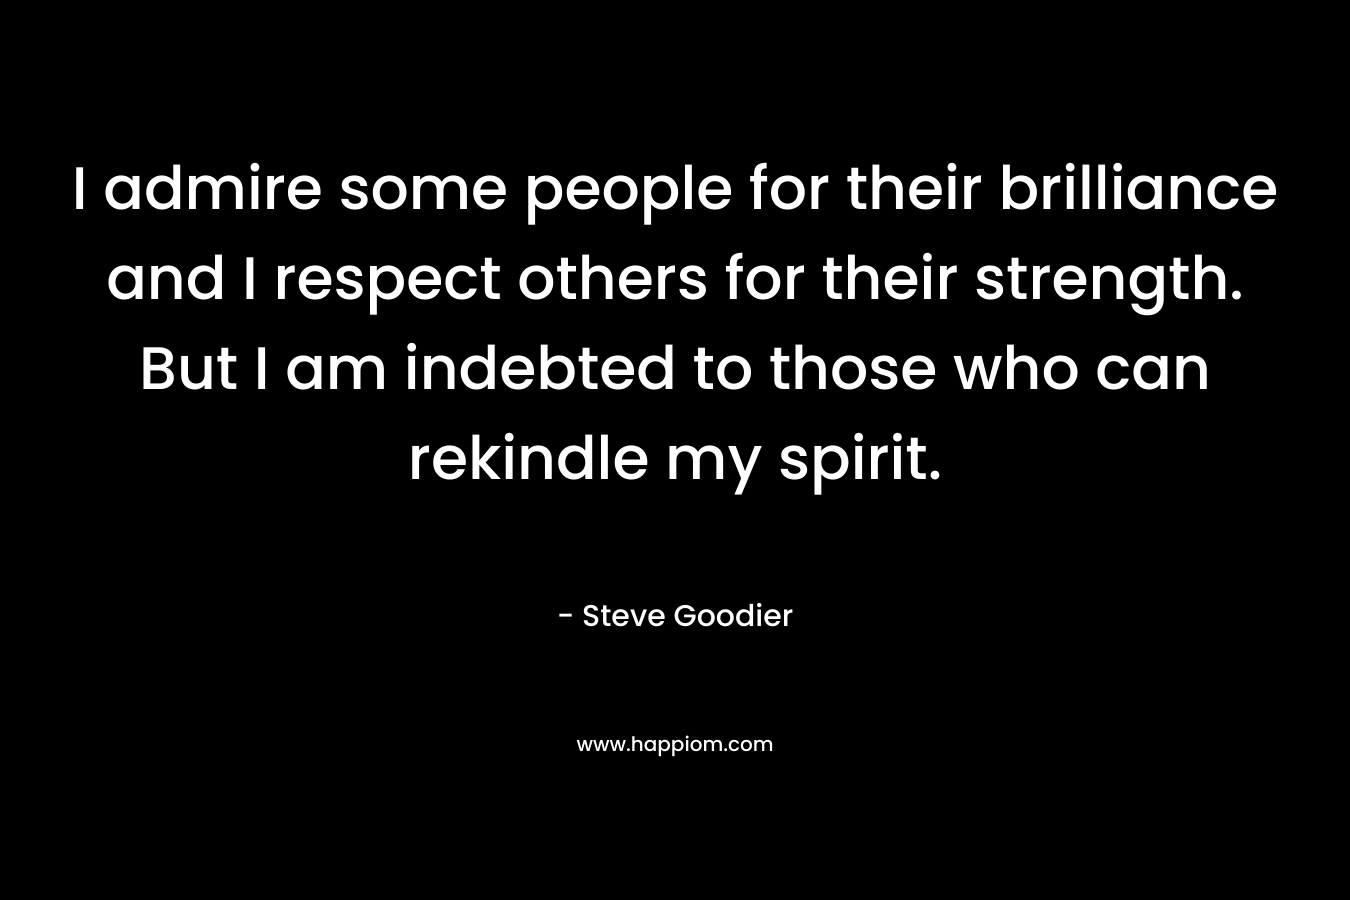 I admire some people for their brilliance and I respect others for their strength. But I am indebted to those who can rekindle my spirit. – Steve Goodier